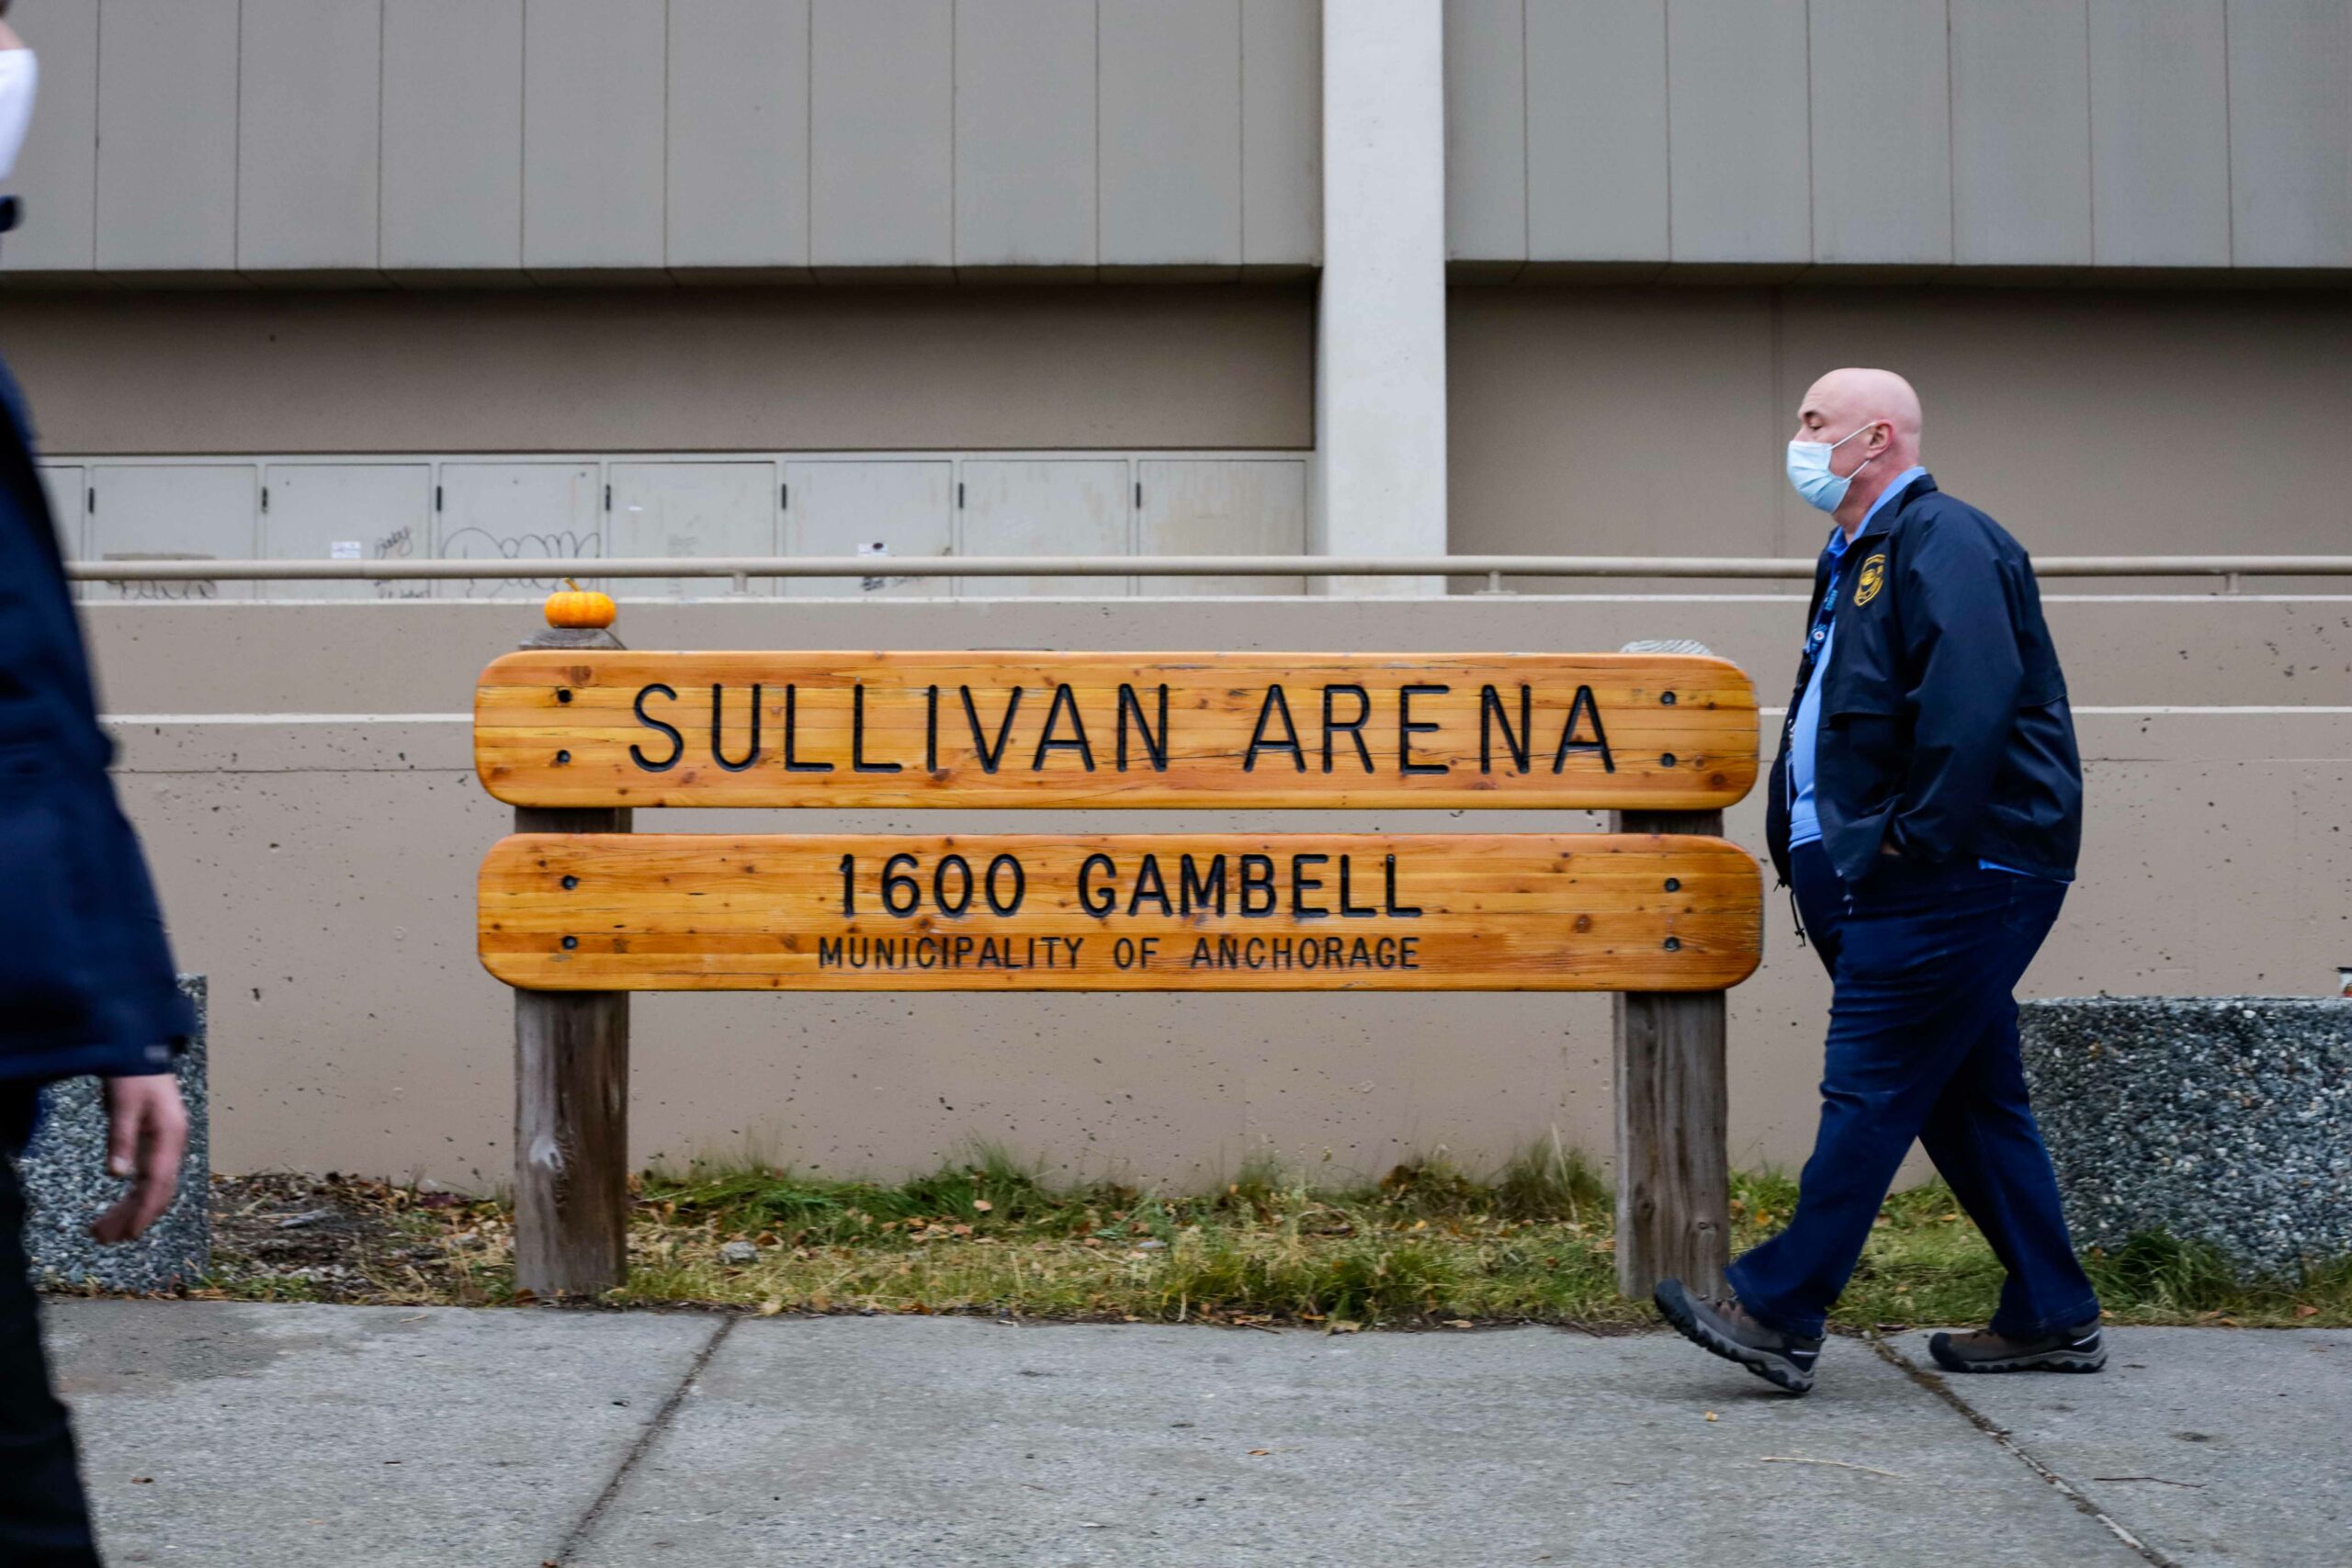 Joe Gerace walks by a sign in front of building that reads "Sullivan Arena"